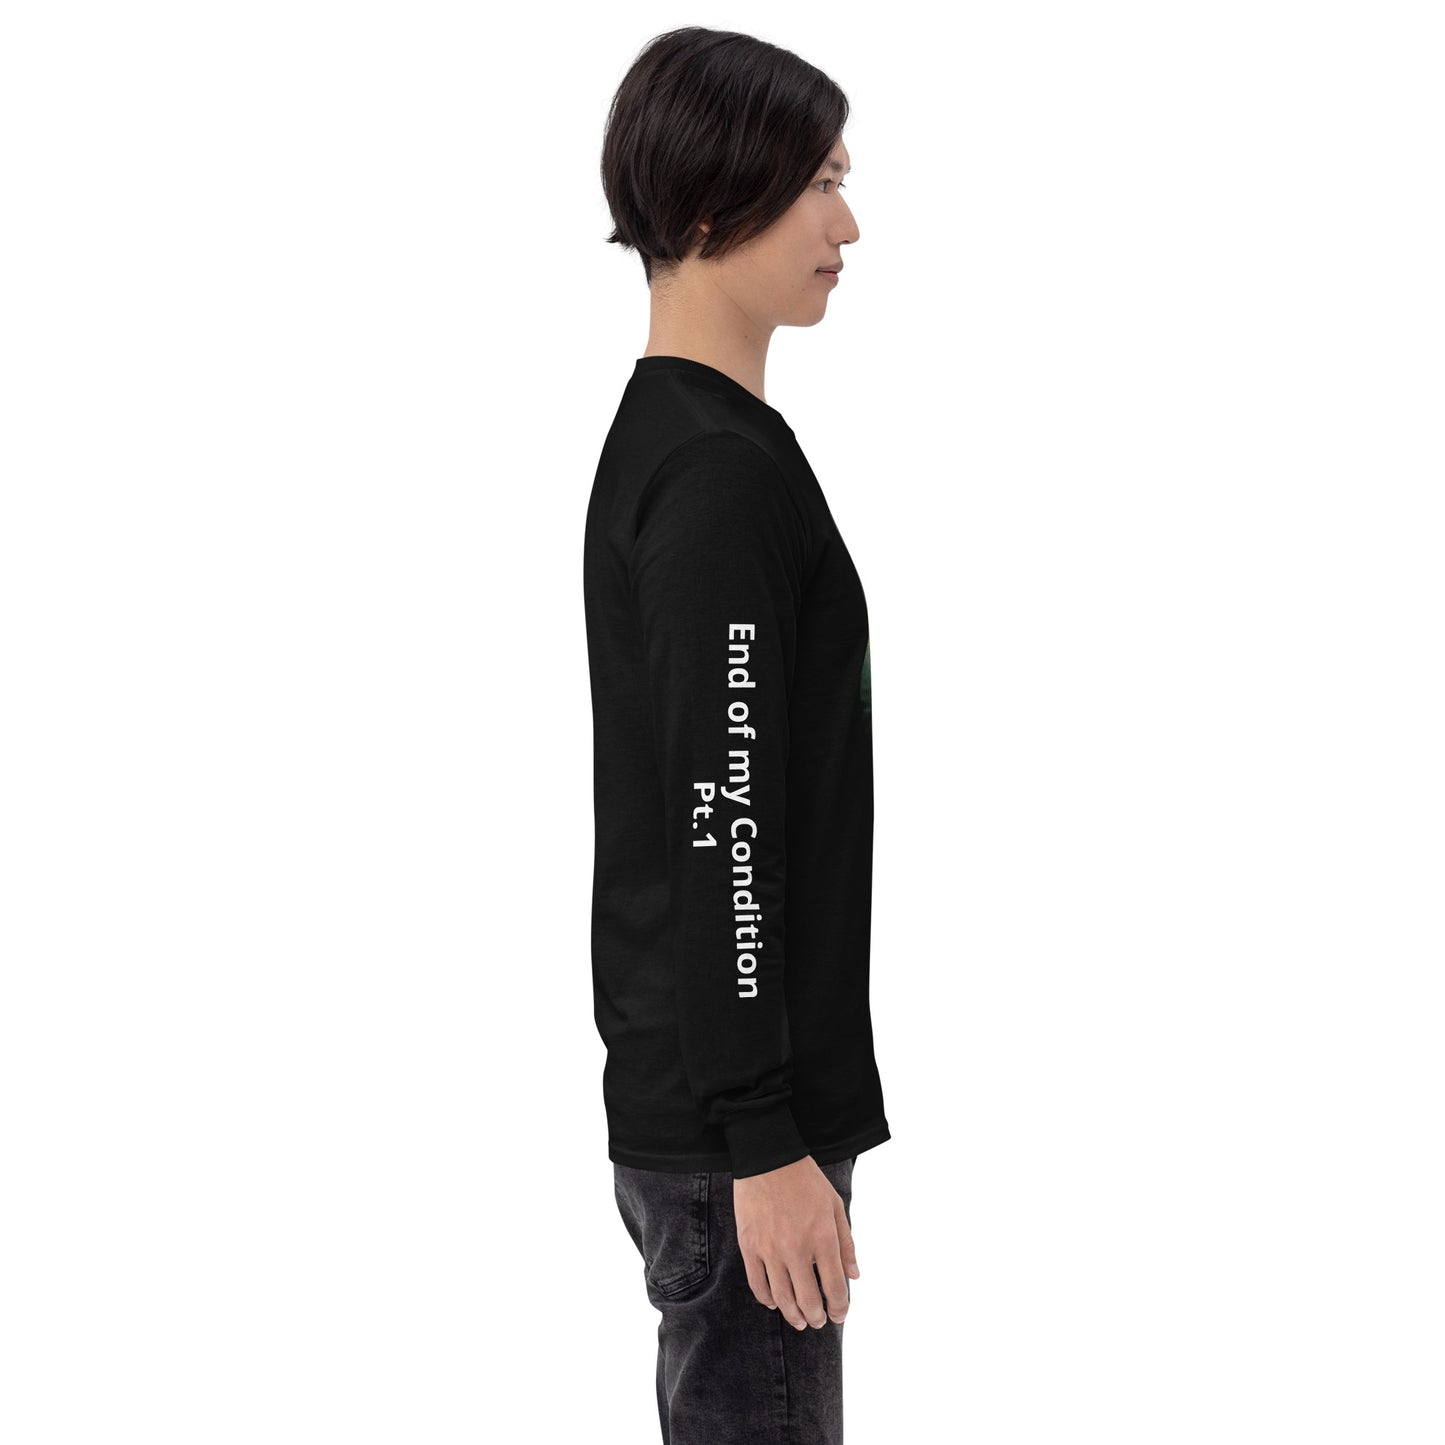 8/12 End of My Condition Pt.1 Long Sleeve Shirt